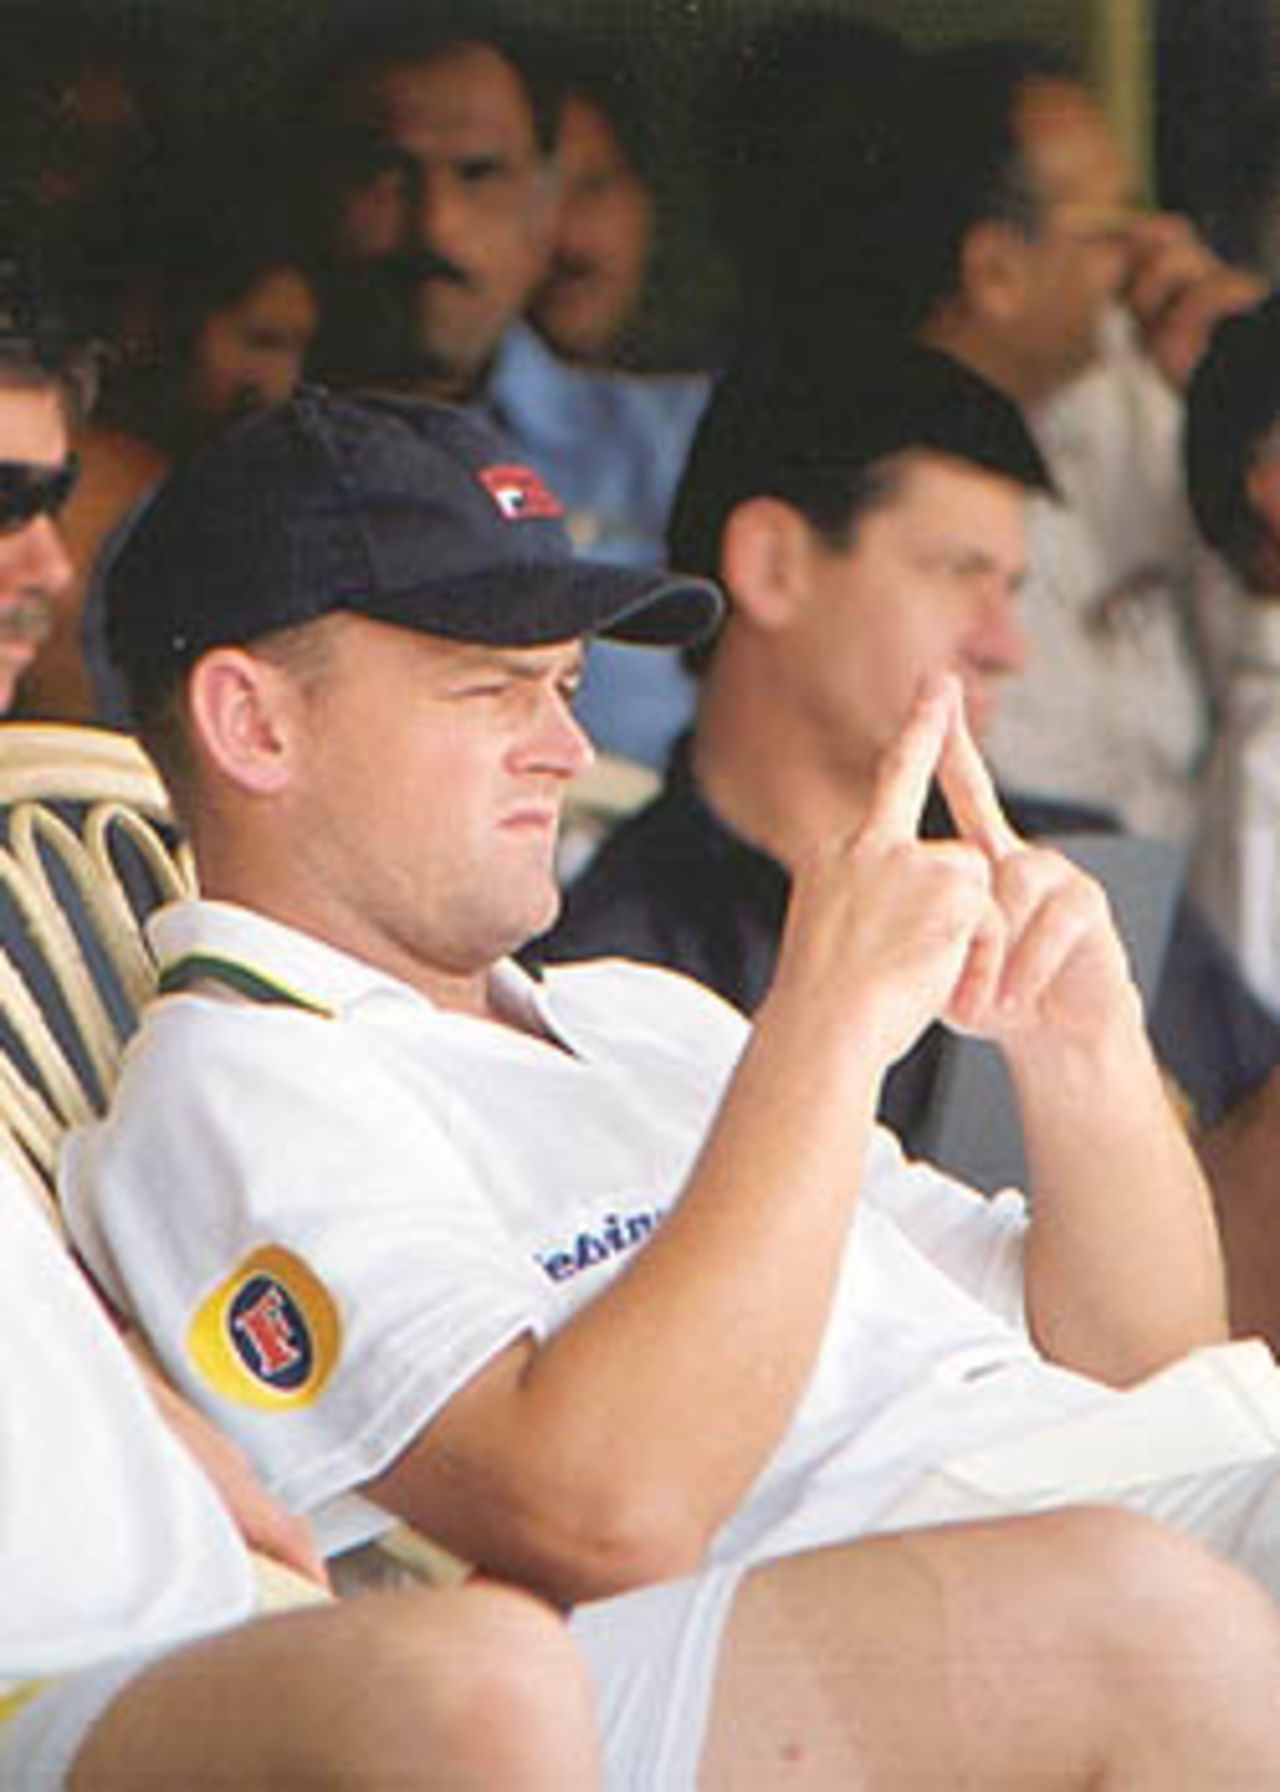 Adam Gilchrist watches the proceedings keenly from the confines of the stands, Australia in India, 2000/01, India 'A' v Australians, Vidarbha C.A. Ground, Nagpur, 17-19 February 2001.